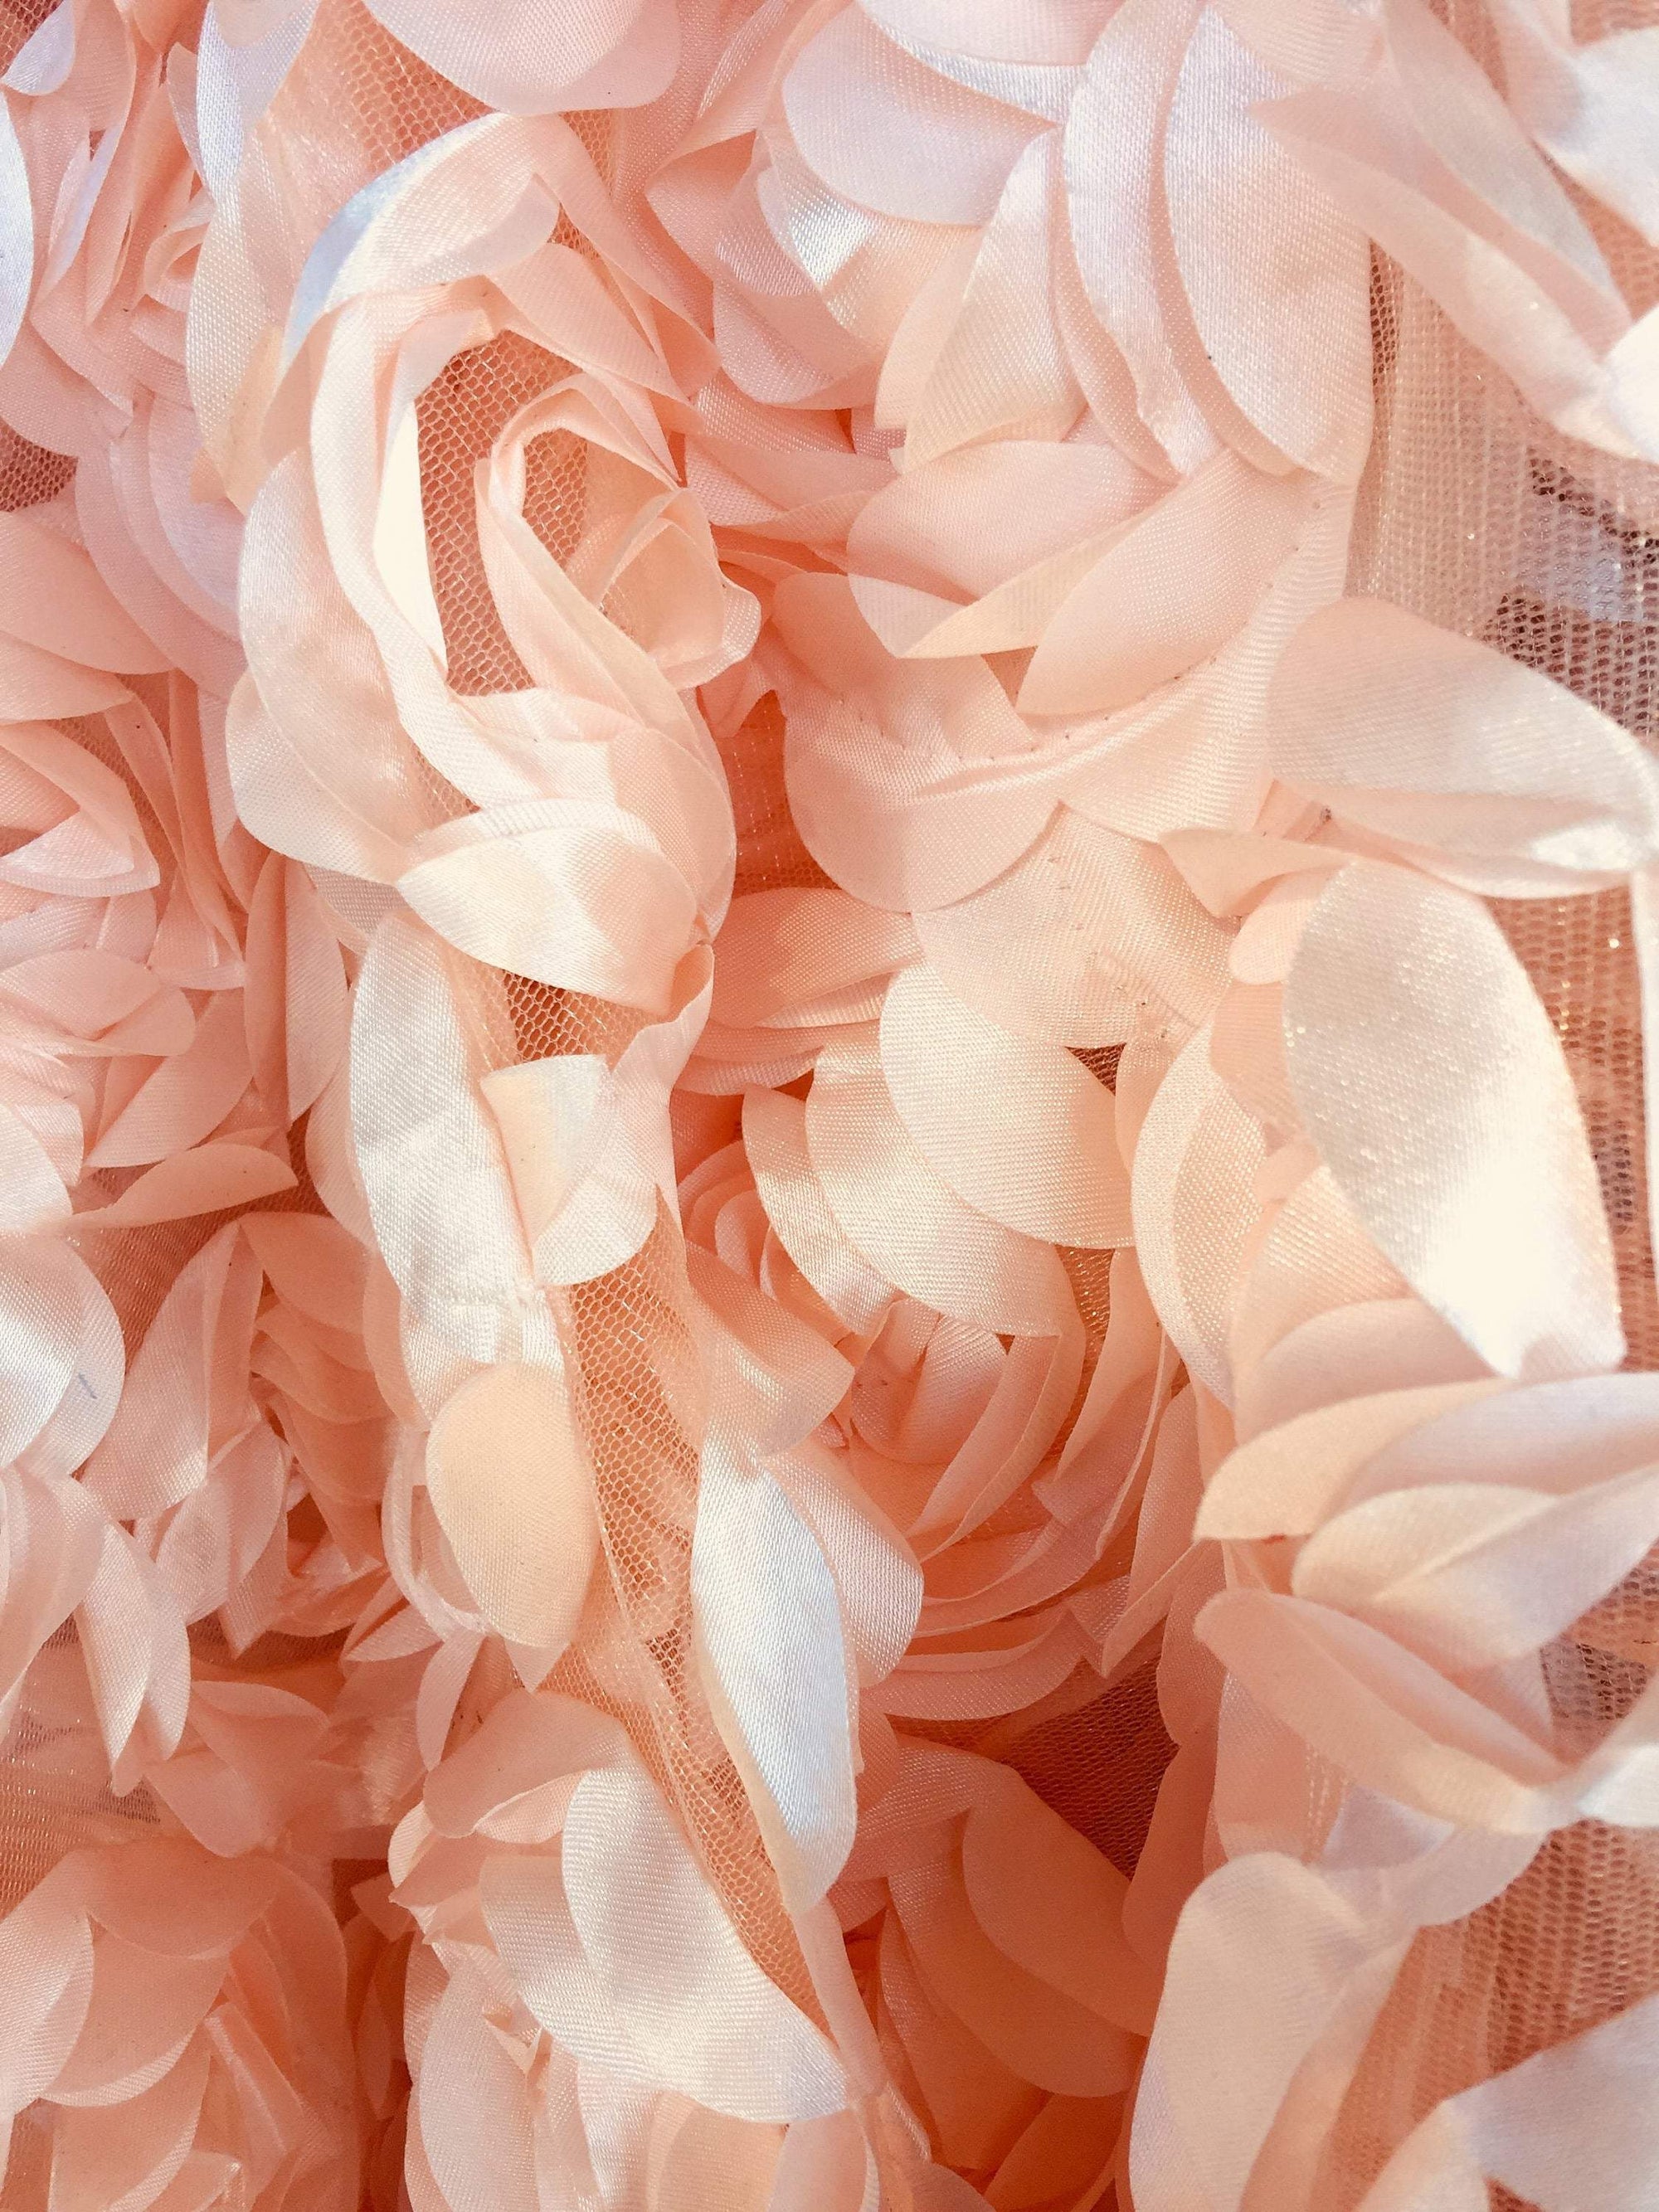 Maci LIGHT PEACH 3D Floral Polyester Satin Rosette on Mesh Fabric by the Yard - 10057